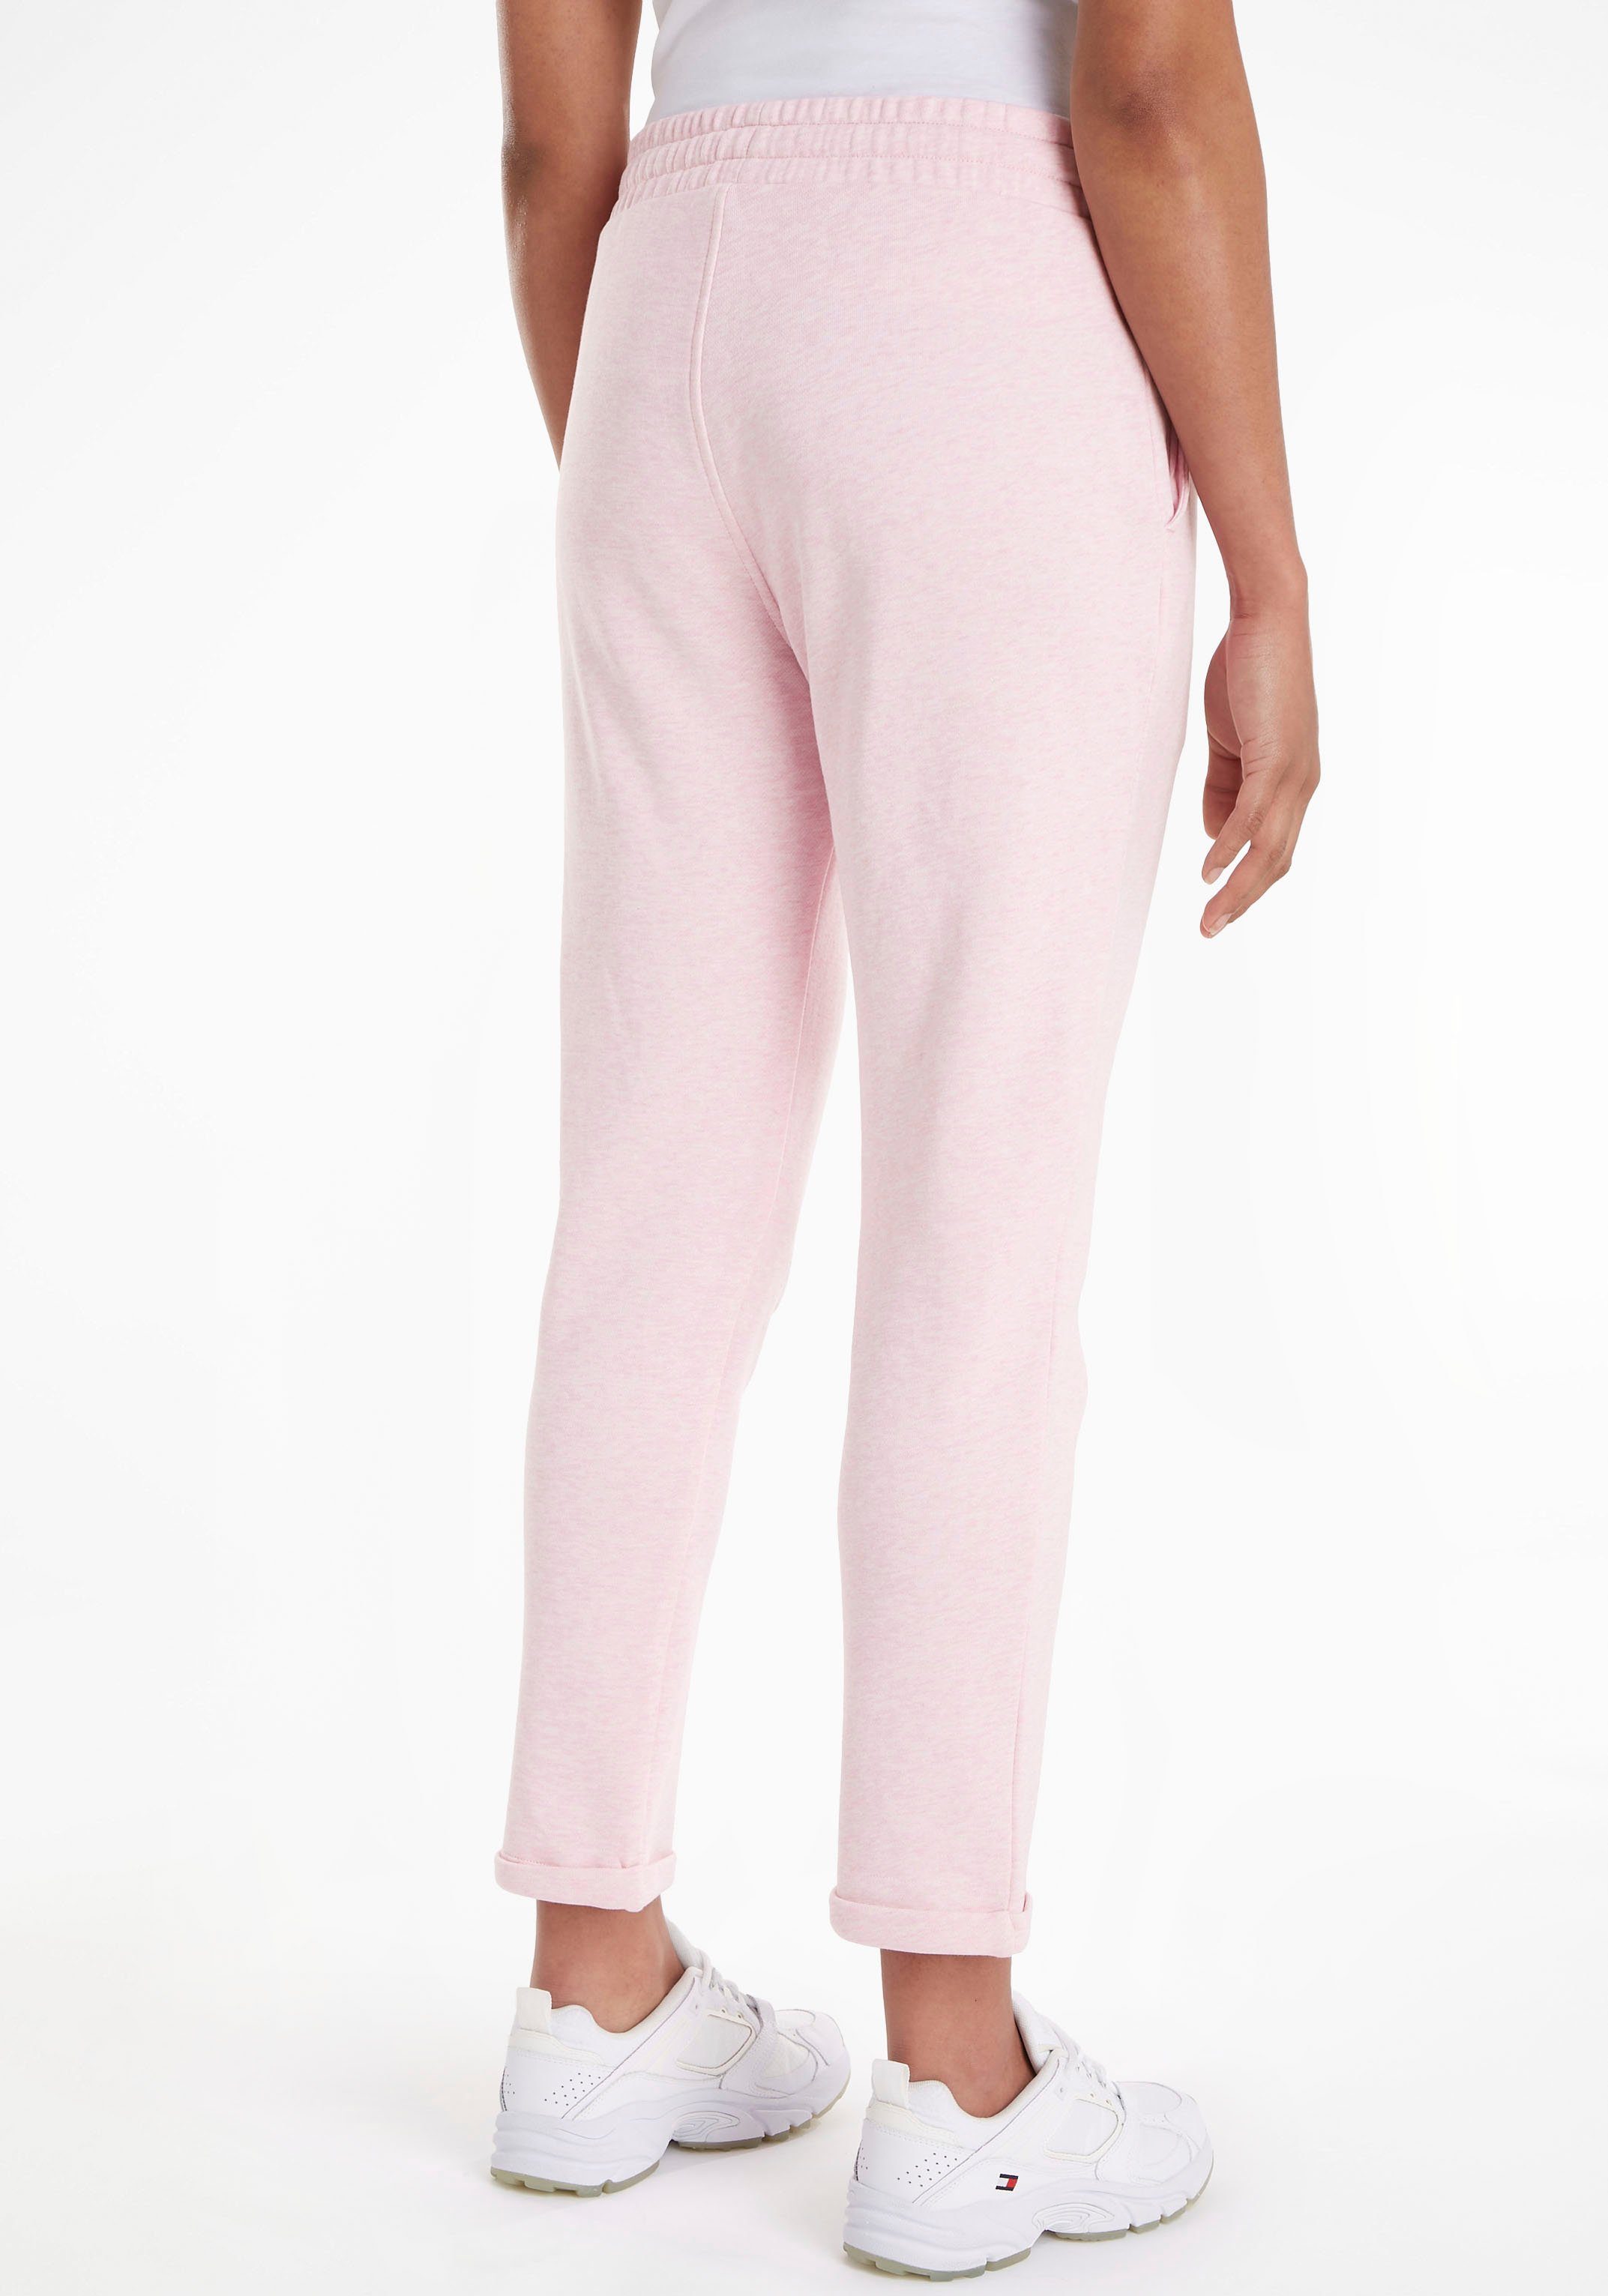 Tommy Hilfiger Sweatpants ROUNDALL Classic-Pink-Heather NYC SWEATPANTS Markenlabel Tommy mit Hilfiger TAPERED